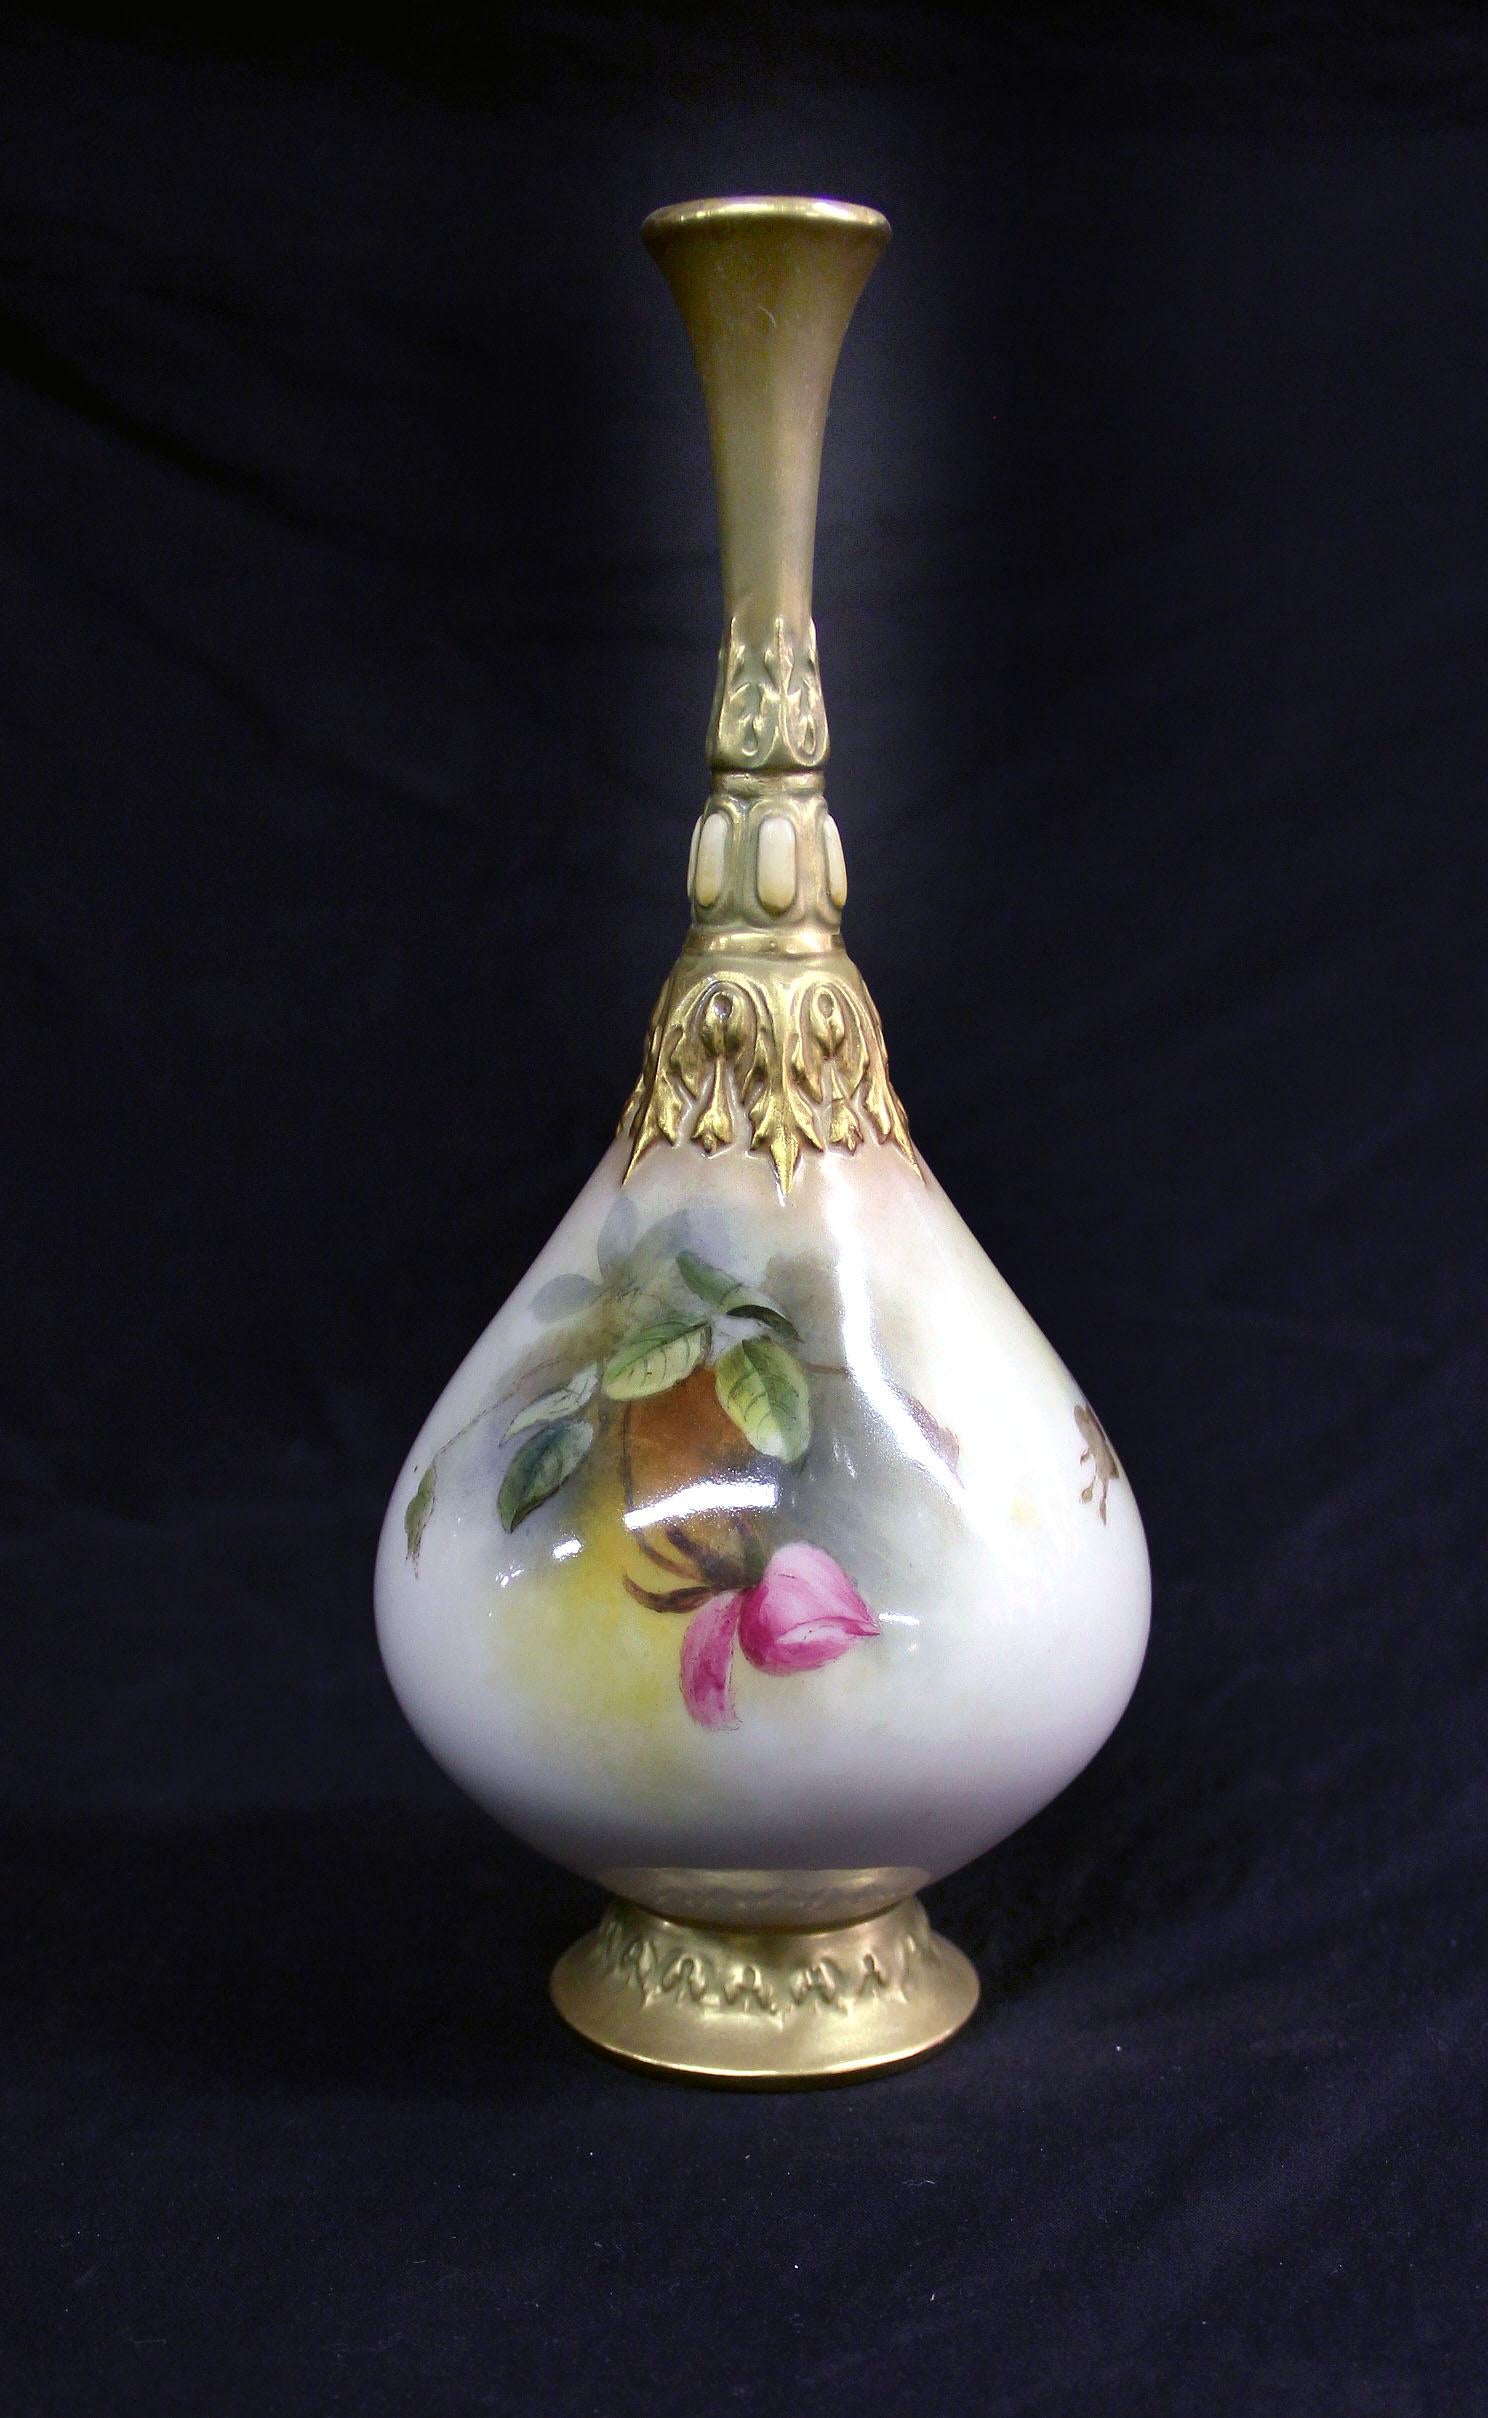 A beautiful late 19th century hand painted Royal Worcester porcelain flower vase

Painted with flowers on the front and back, the neck with raised gold designs.